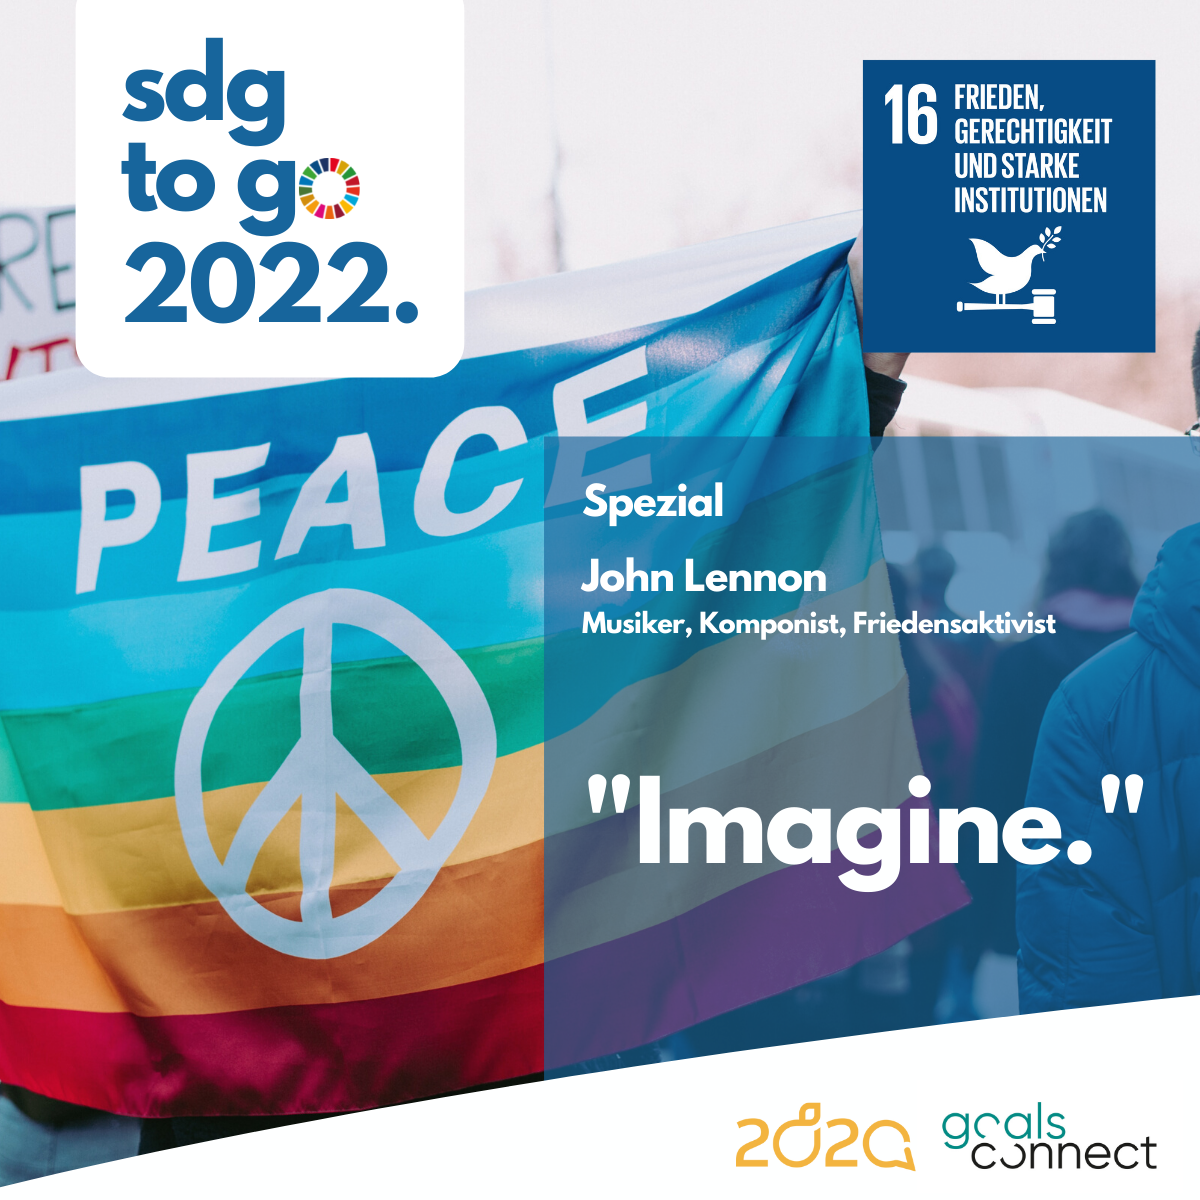 You are currently viewing SDG to go – Heute: SPEZIAL zu SDG 16